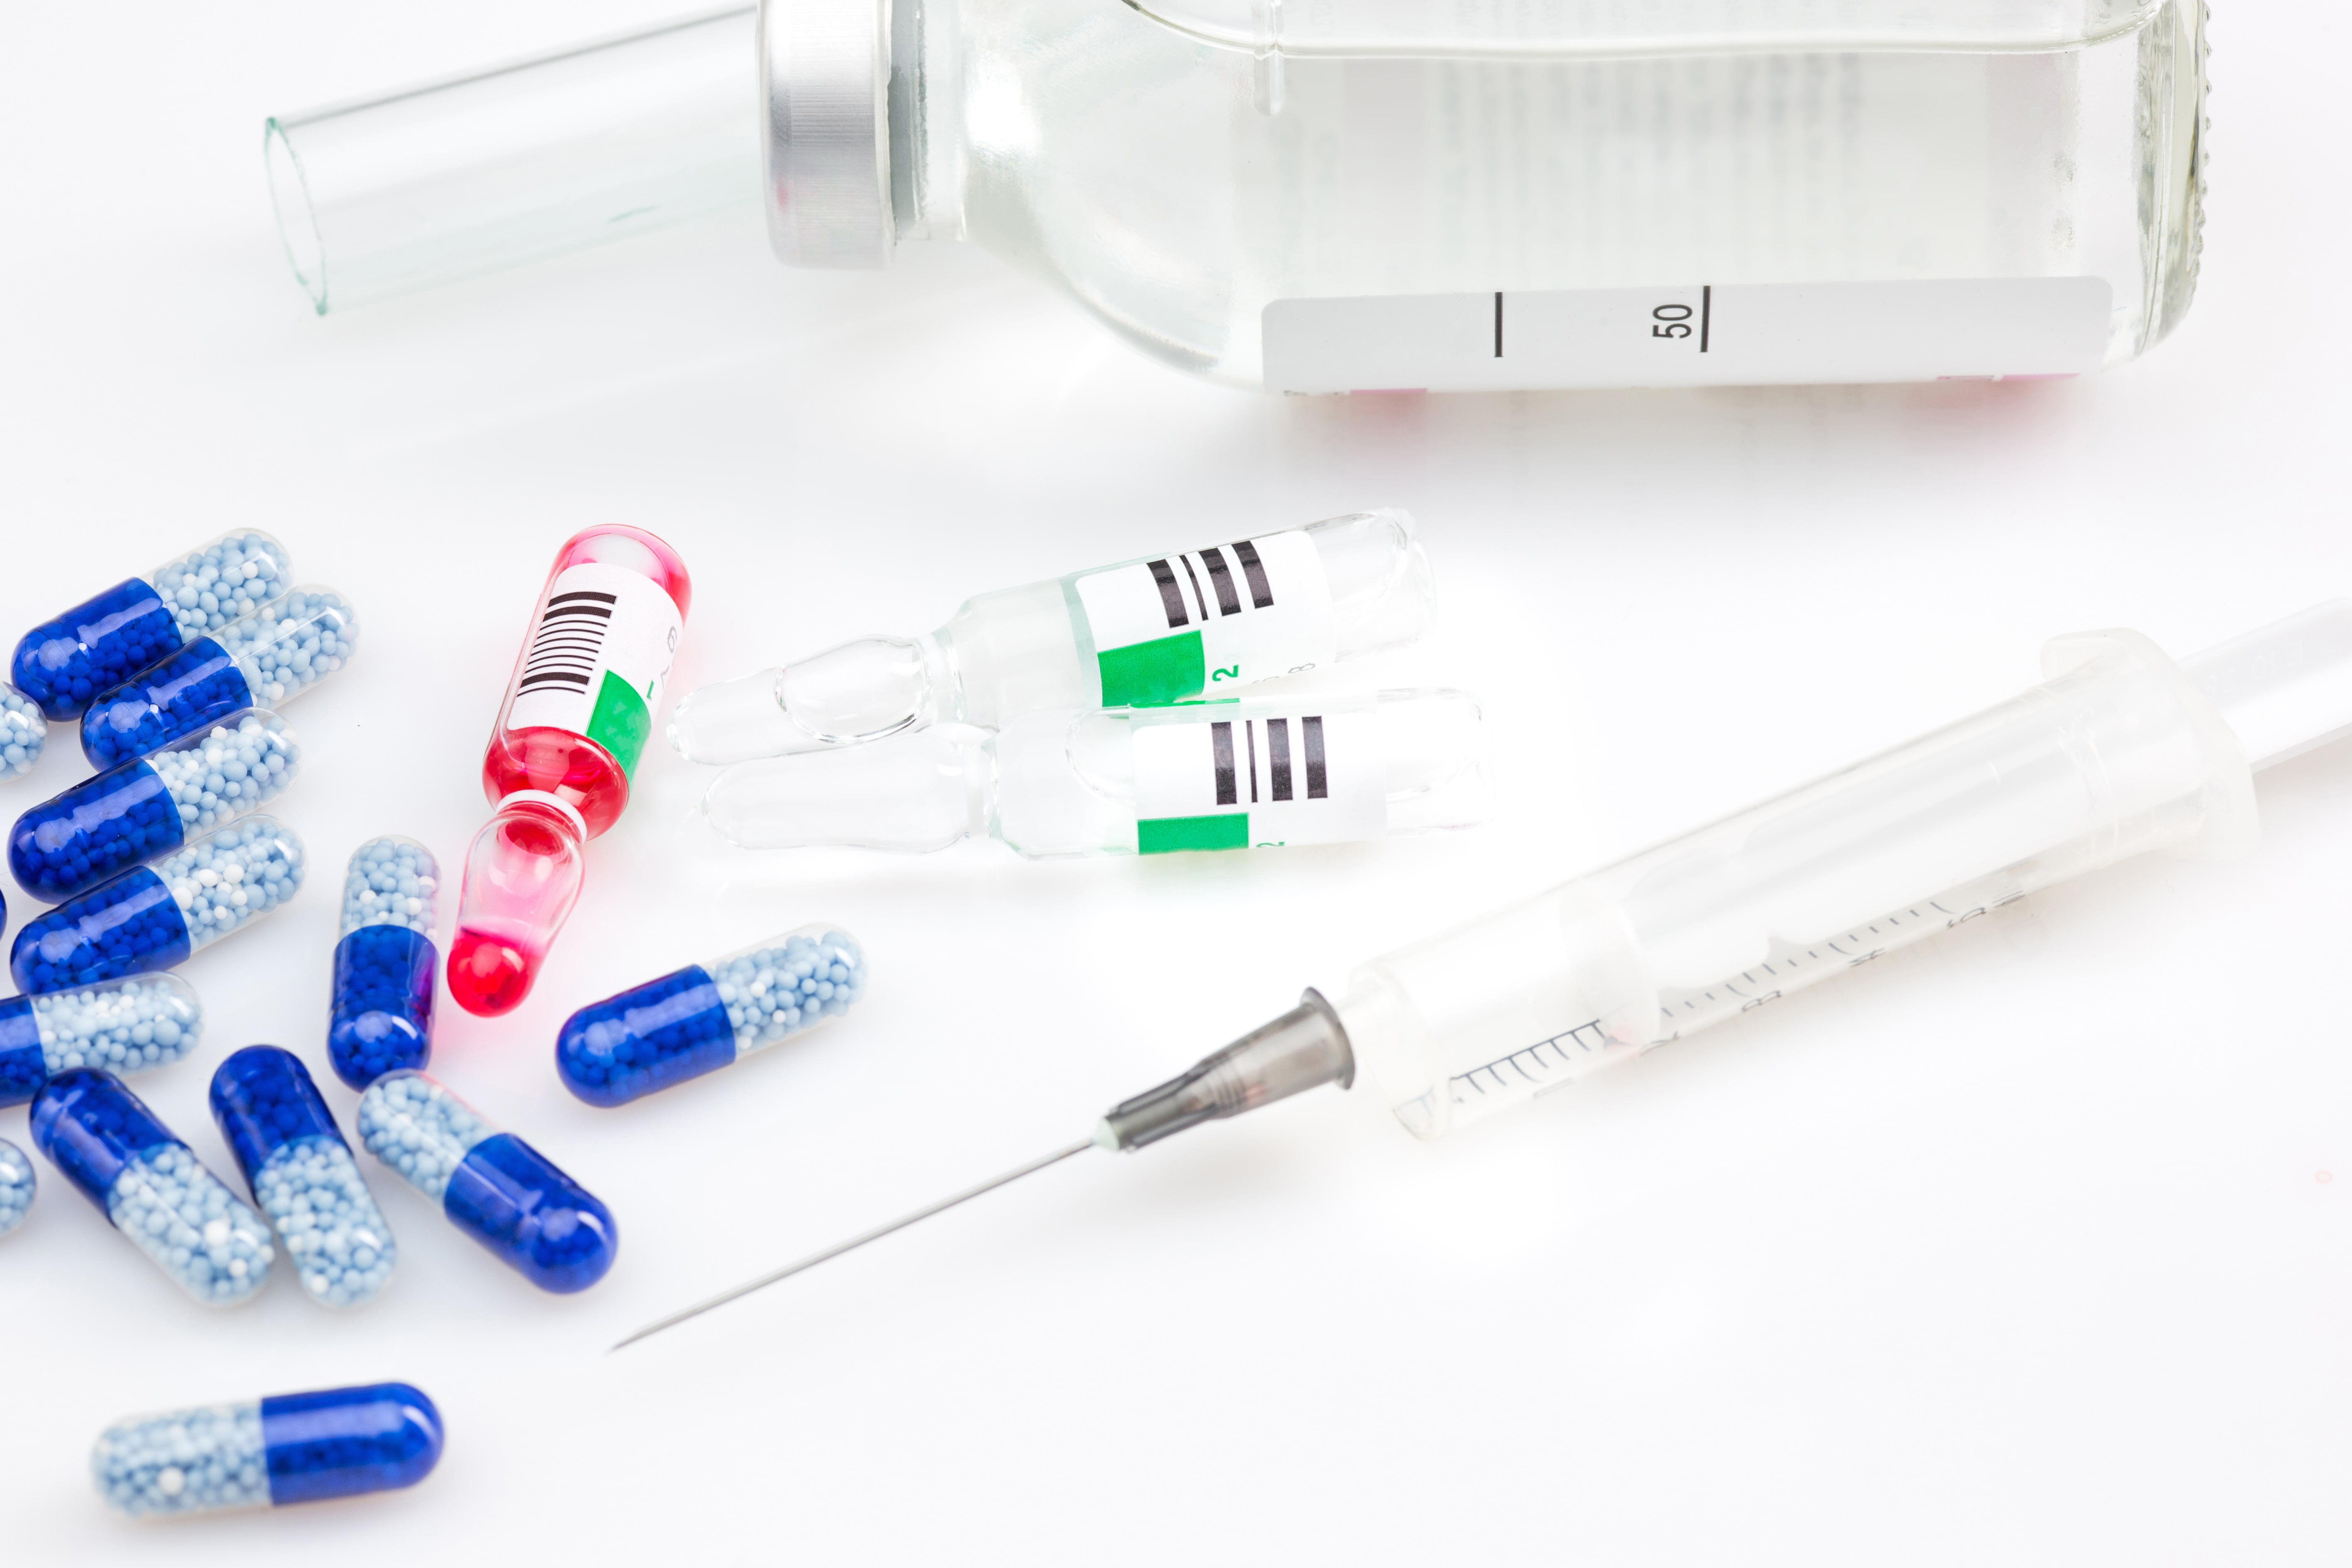 Implementing Drug Testing Kits: A General Overview Guide